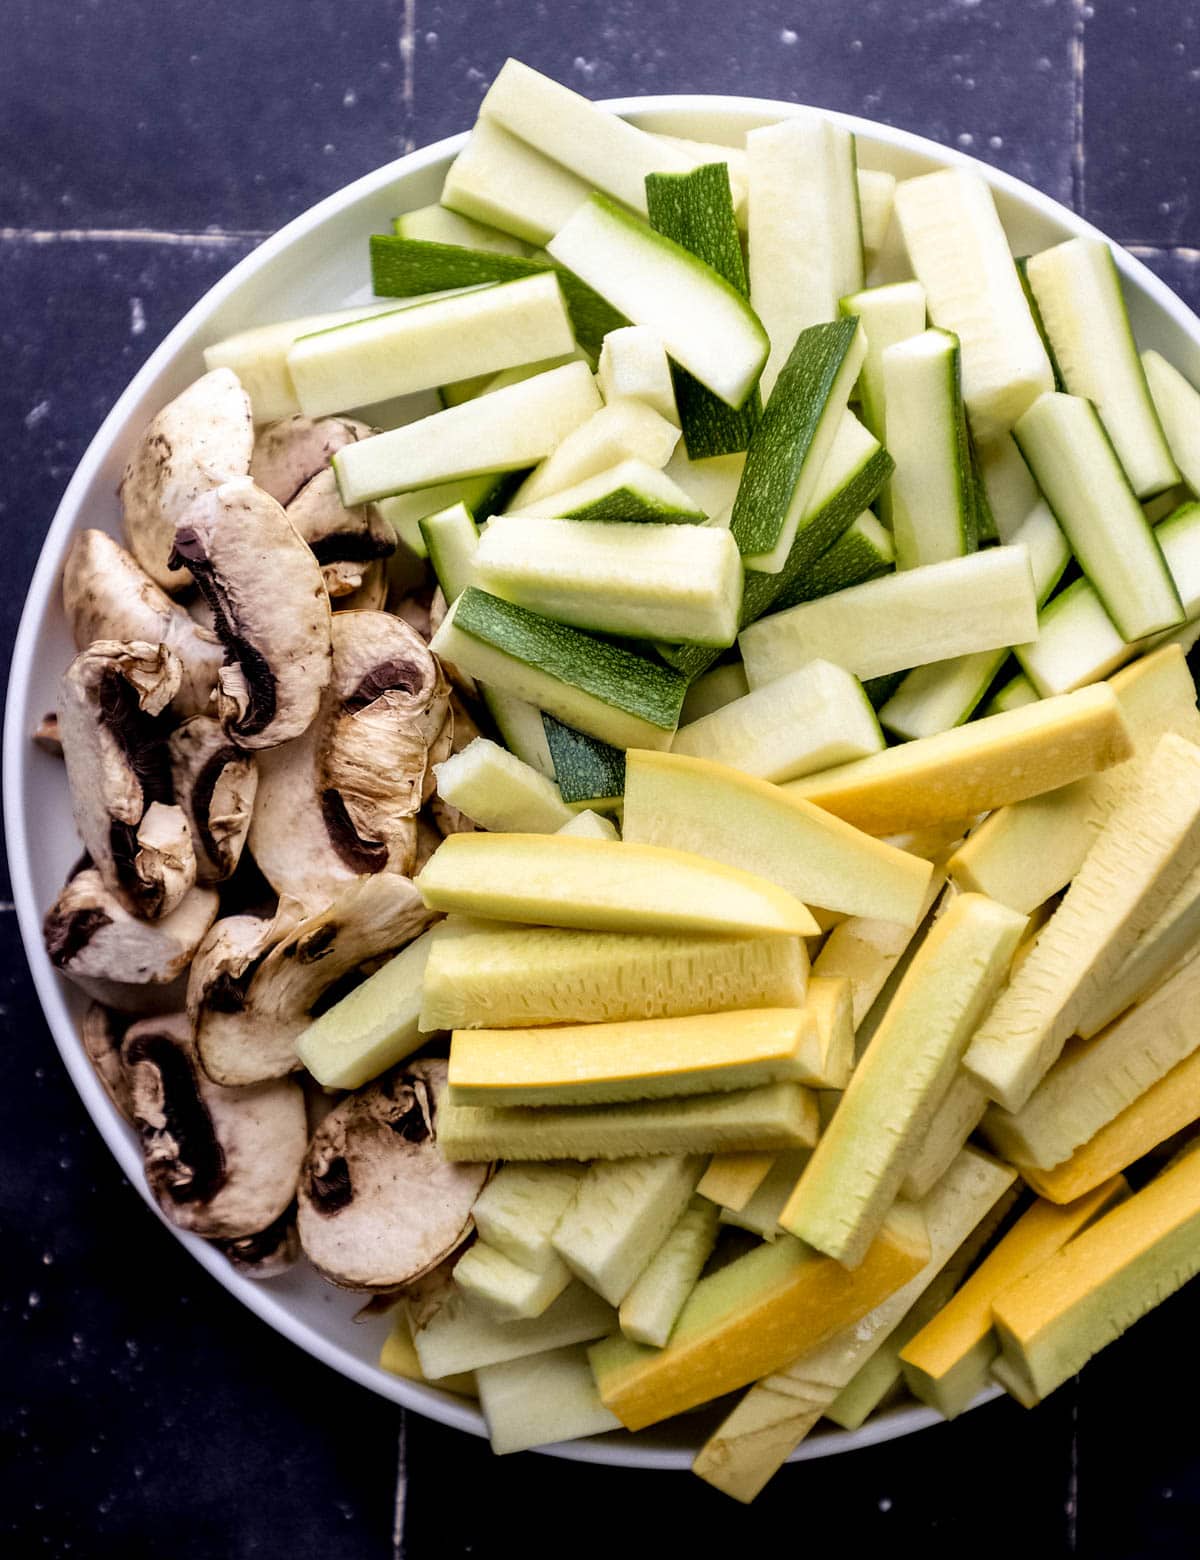 Large white plate with fresh sliced zucchini, squash, and sliced mushrooms on it. 